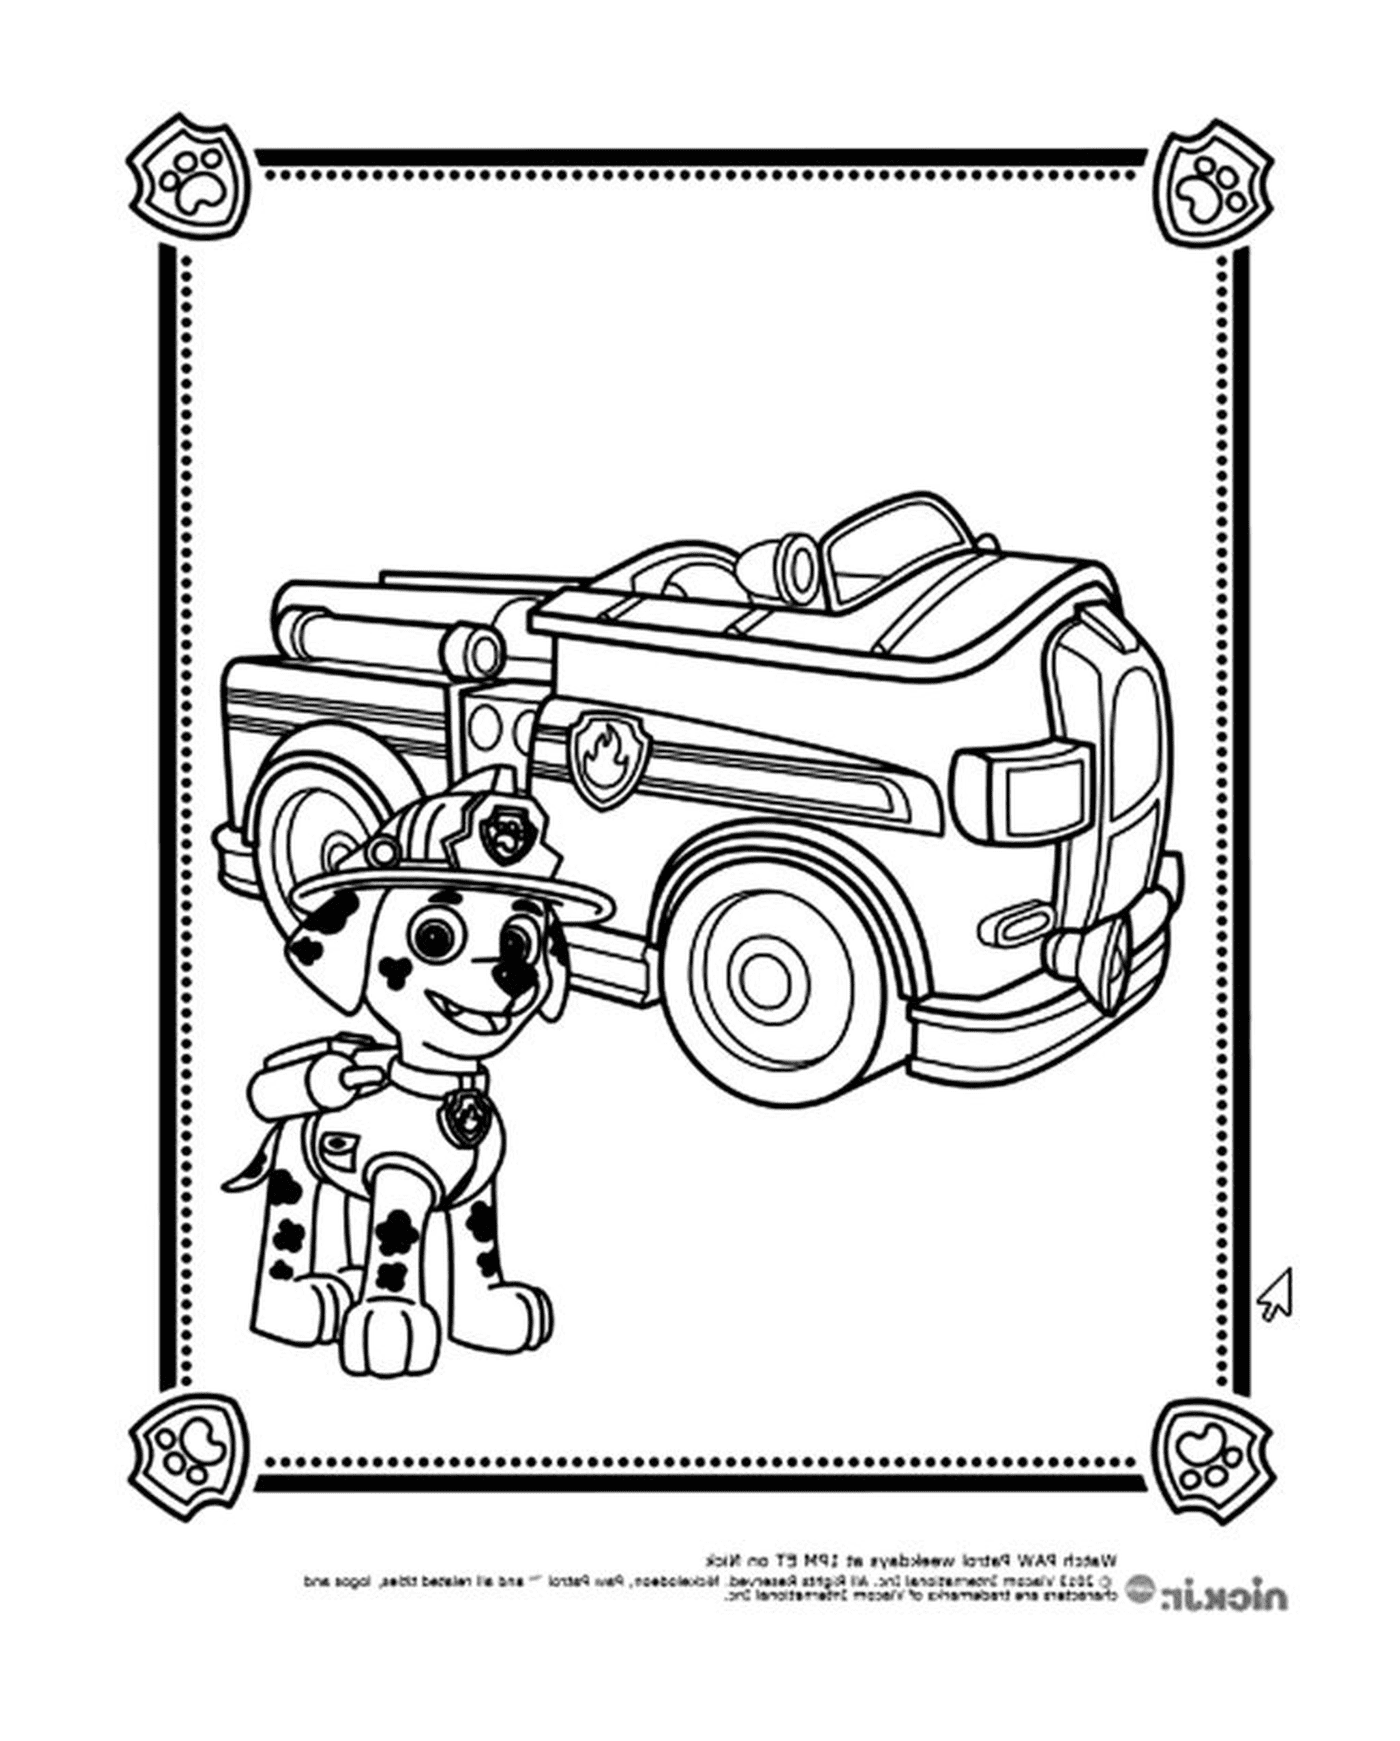  dog firefighter in front of truck pat patrol 